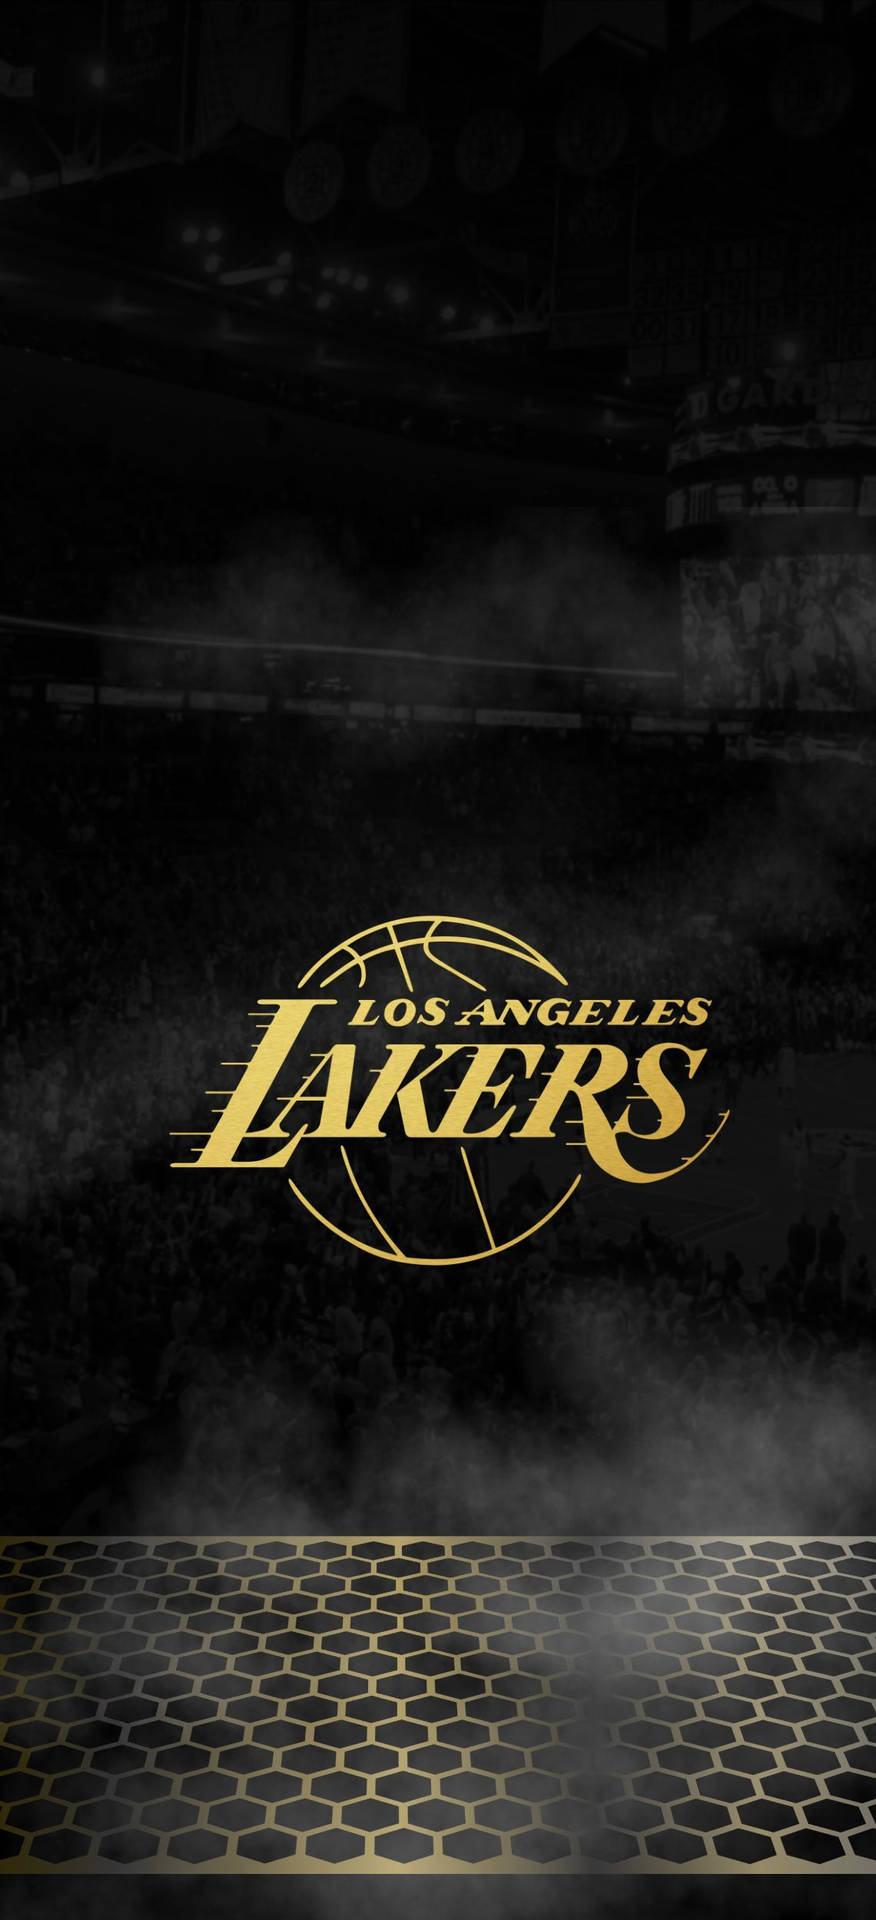 Show your Lakers pride with the perfect Lakers-themed iPhone Wallpaper